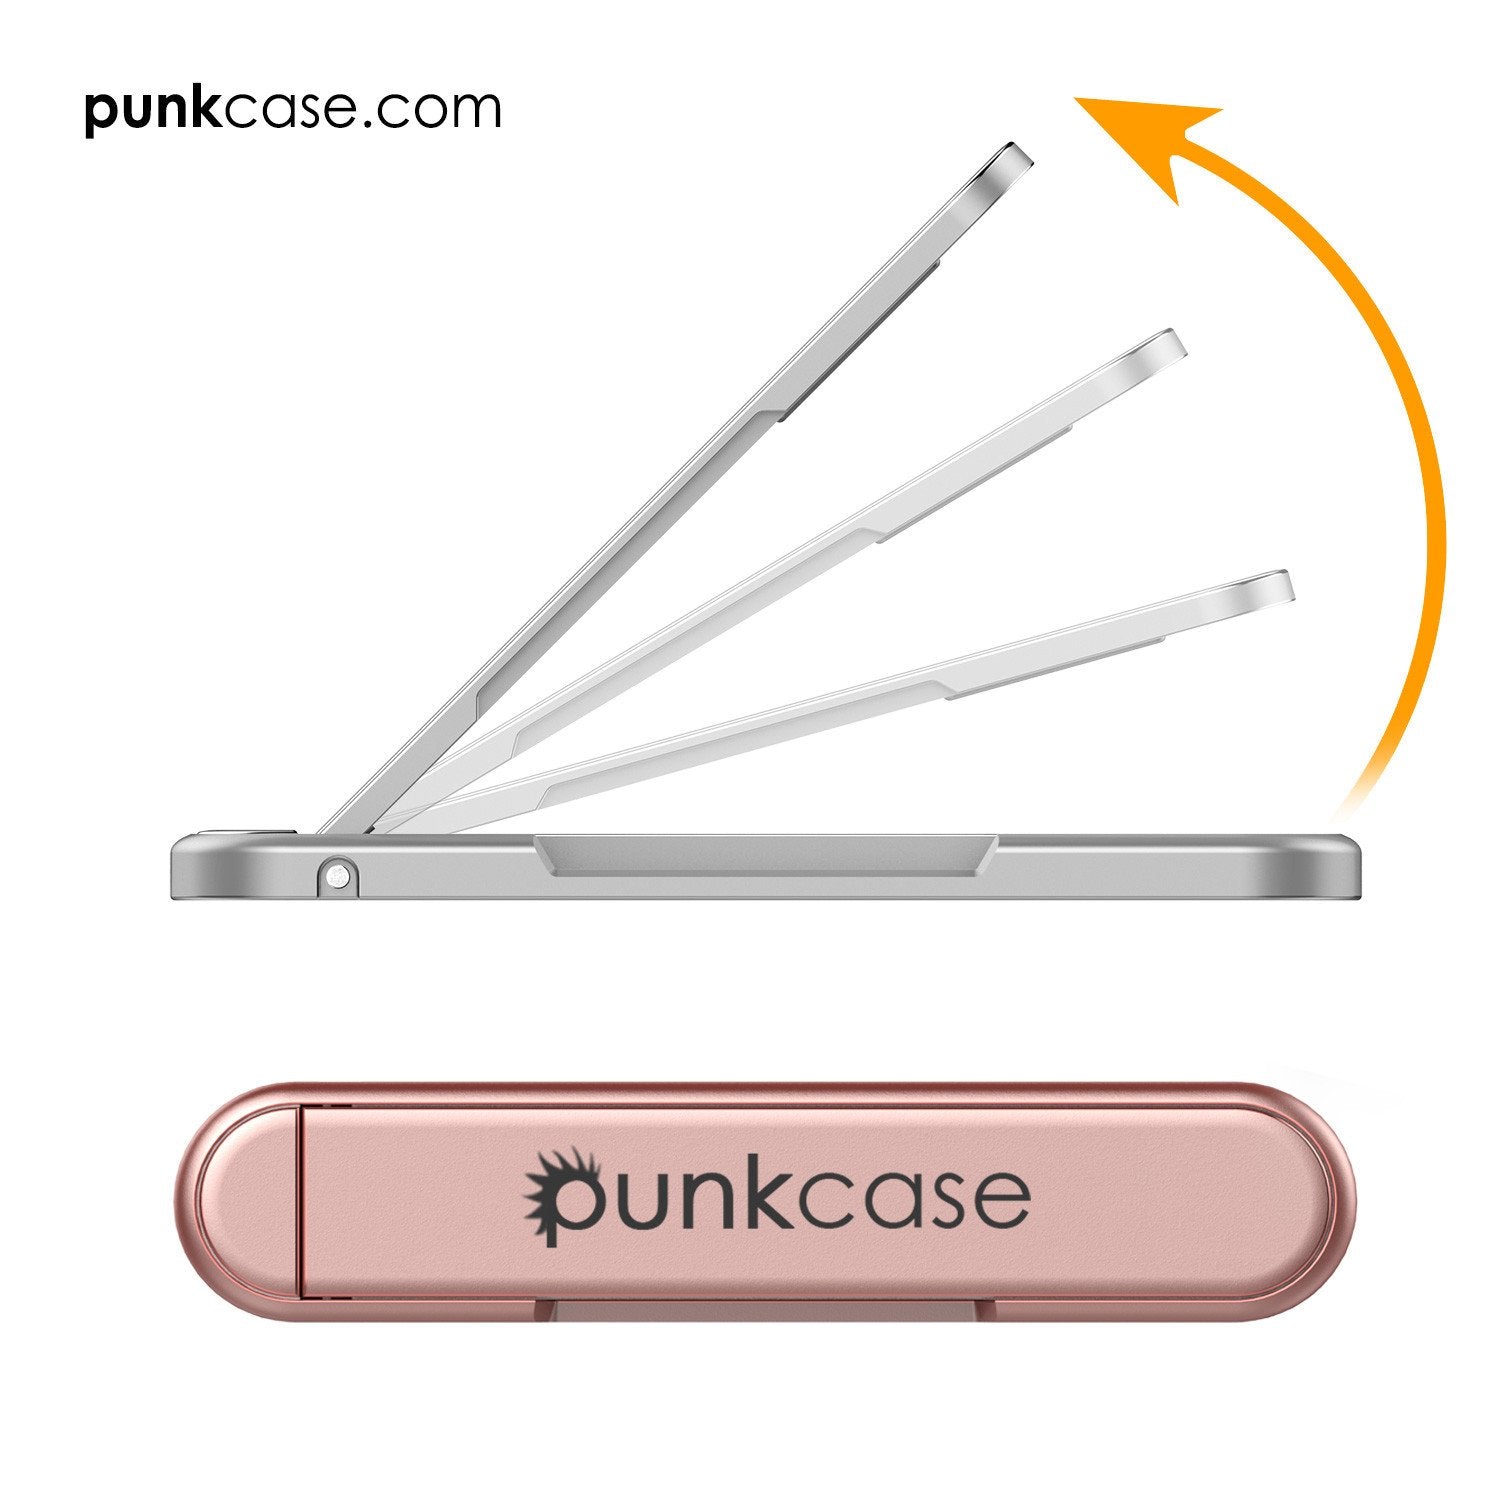 PUNKCASE FlickStick Universal Cell Phone Kickstand for all Mobile Phones & Cases with Flat Backs, One Finger Operation (Rose Gold)